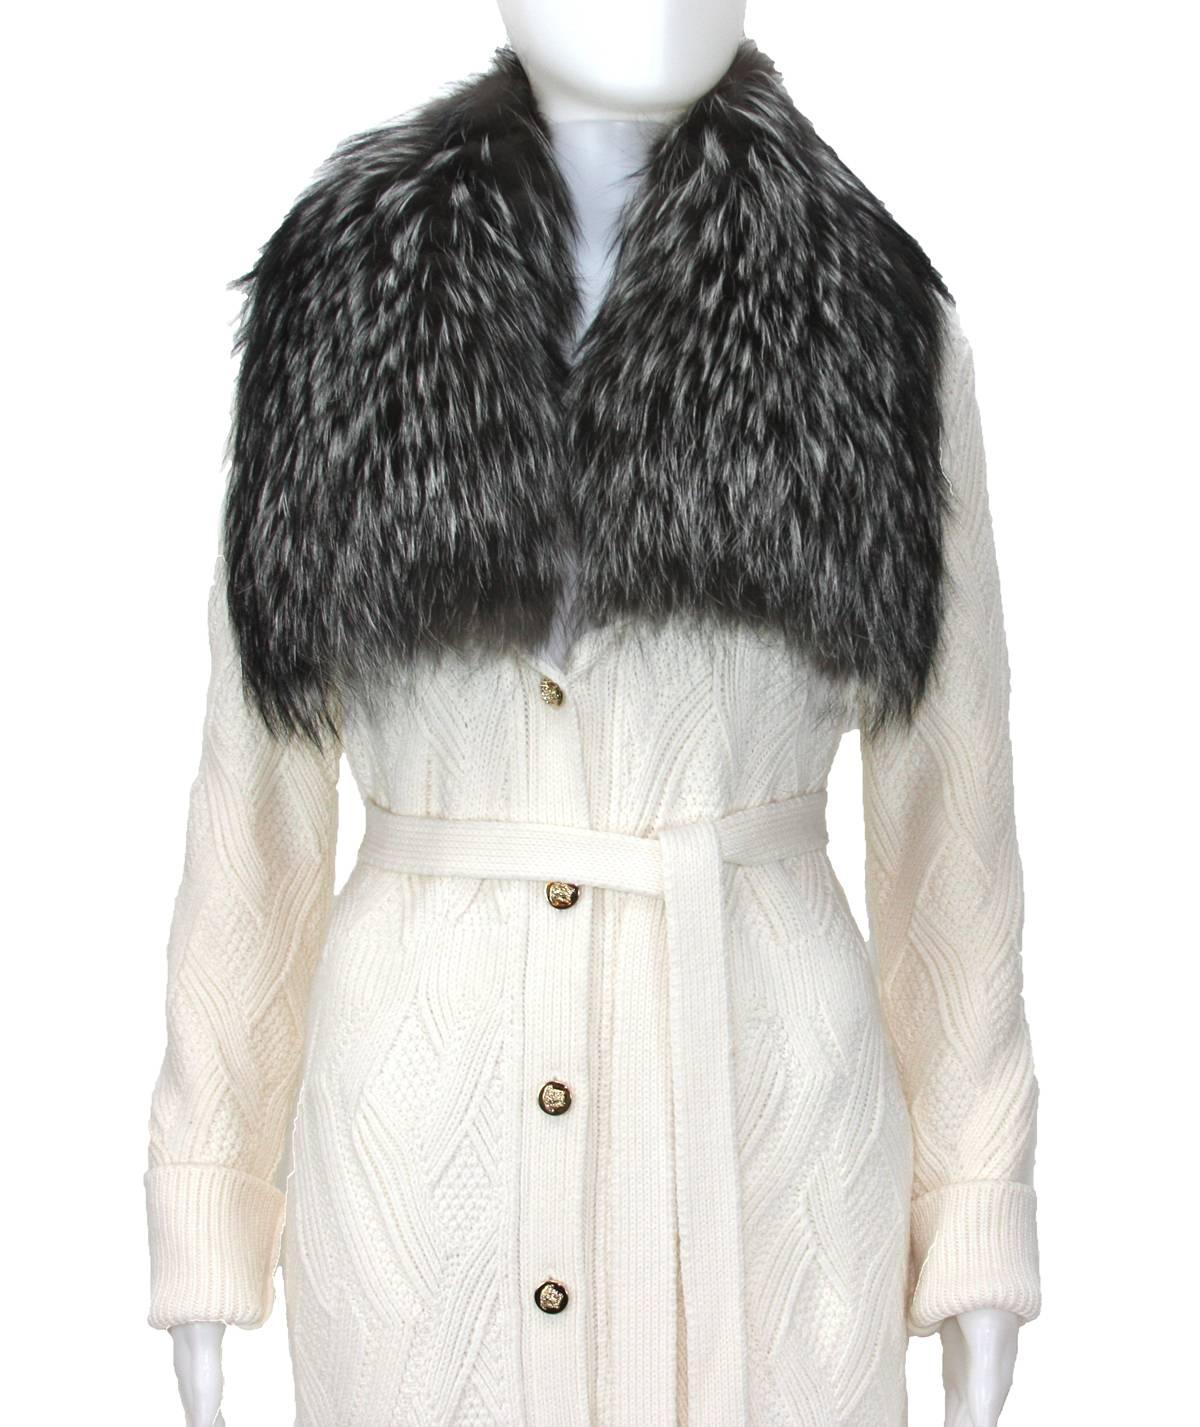 New VERSACE 100% Wool SILVER  FOX Collar Cardigan Coat
Italian Size - 40.
100% Wool
Color - Cream
Real SILVER FOX - Origin FINLAND
Removable Oversize FOX Fur Collar
Gold-Tone Metal Medusa Button Closure, Two Side Pockets, Detachable Belt.
Made in